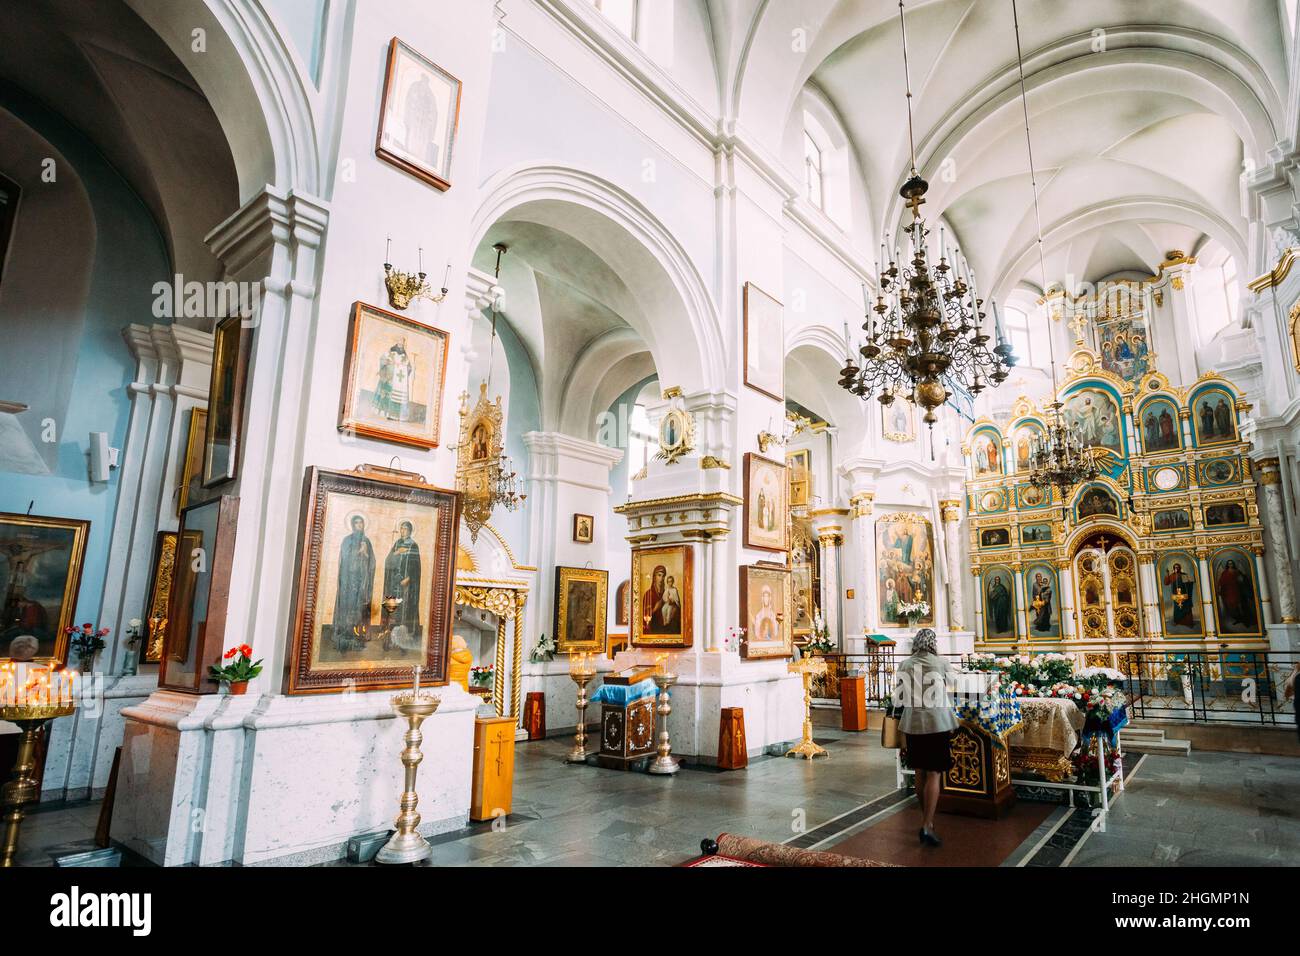 Minsk, Belarus. Interior Of Cathedral Of Holy Spirit In Minsk - The Main Orthodox Church Of Belarus. Stock Photo